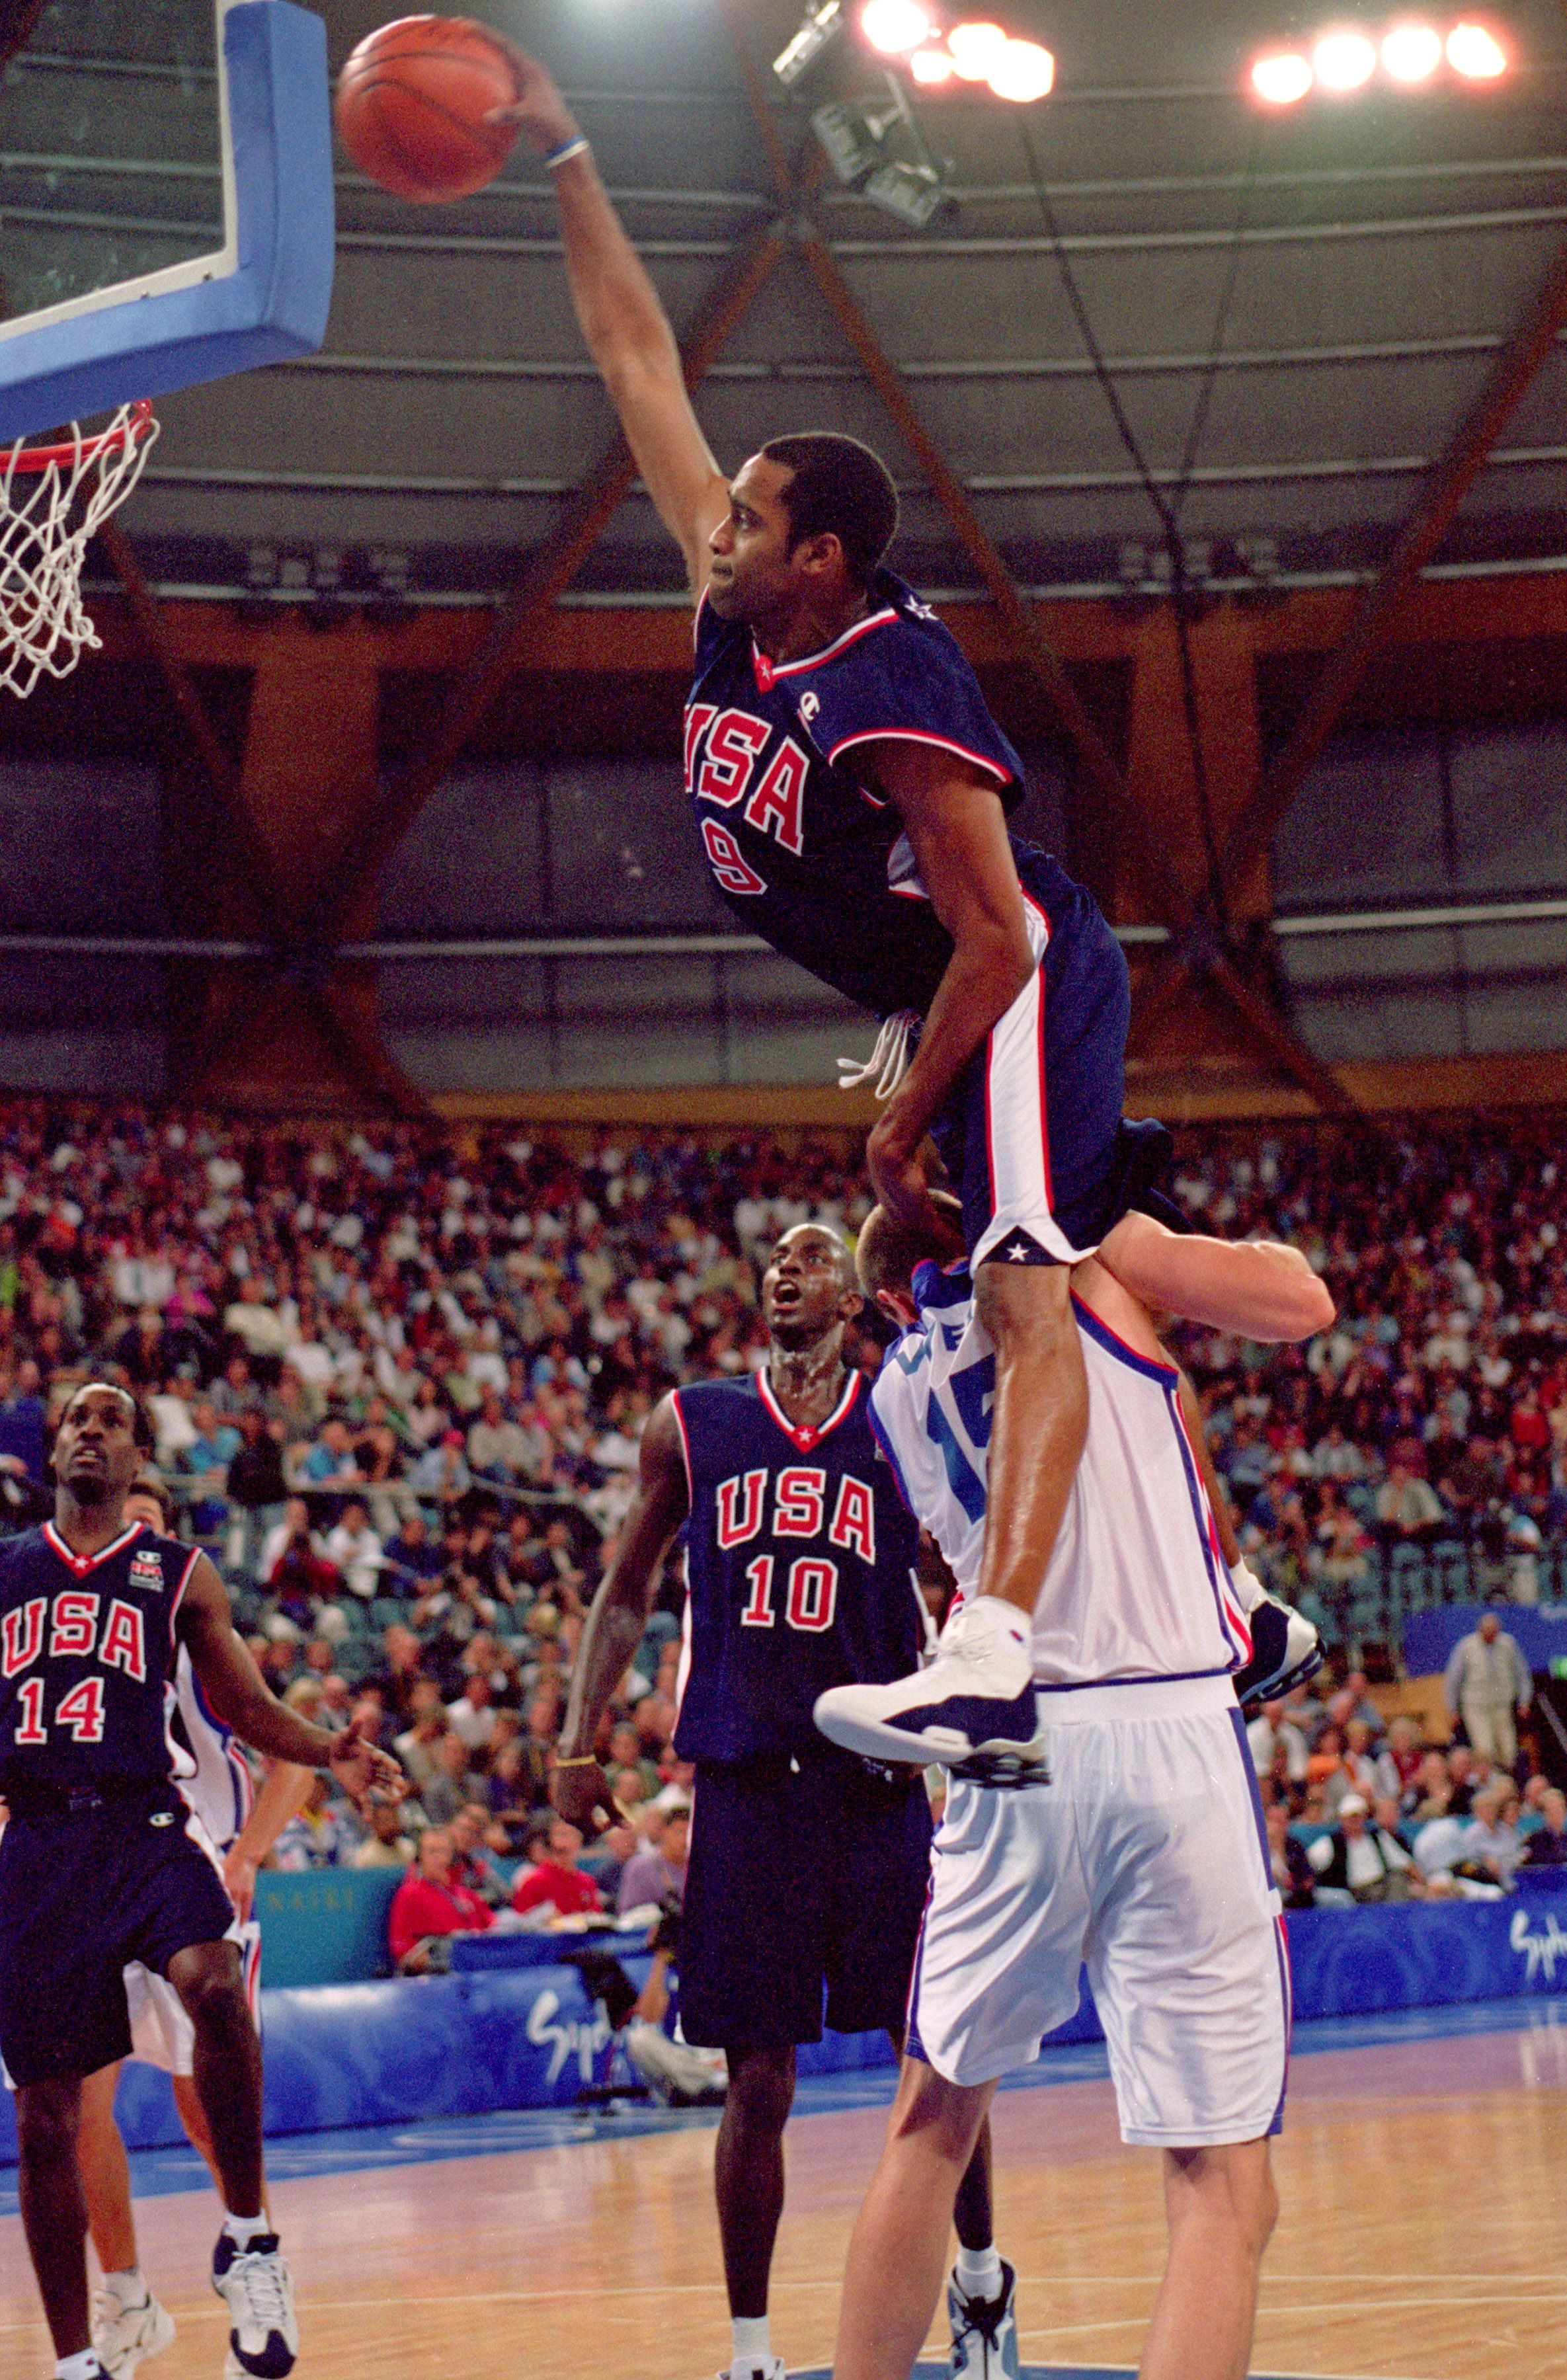 Ranking the 25 most iconic photo in NBA history.